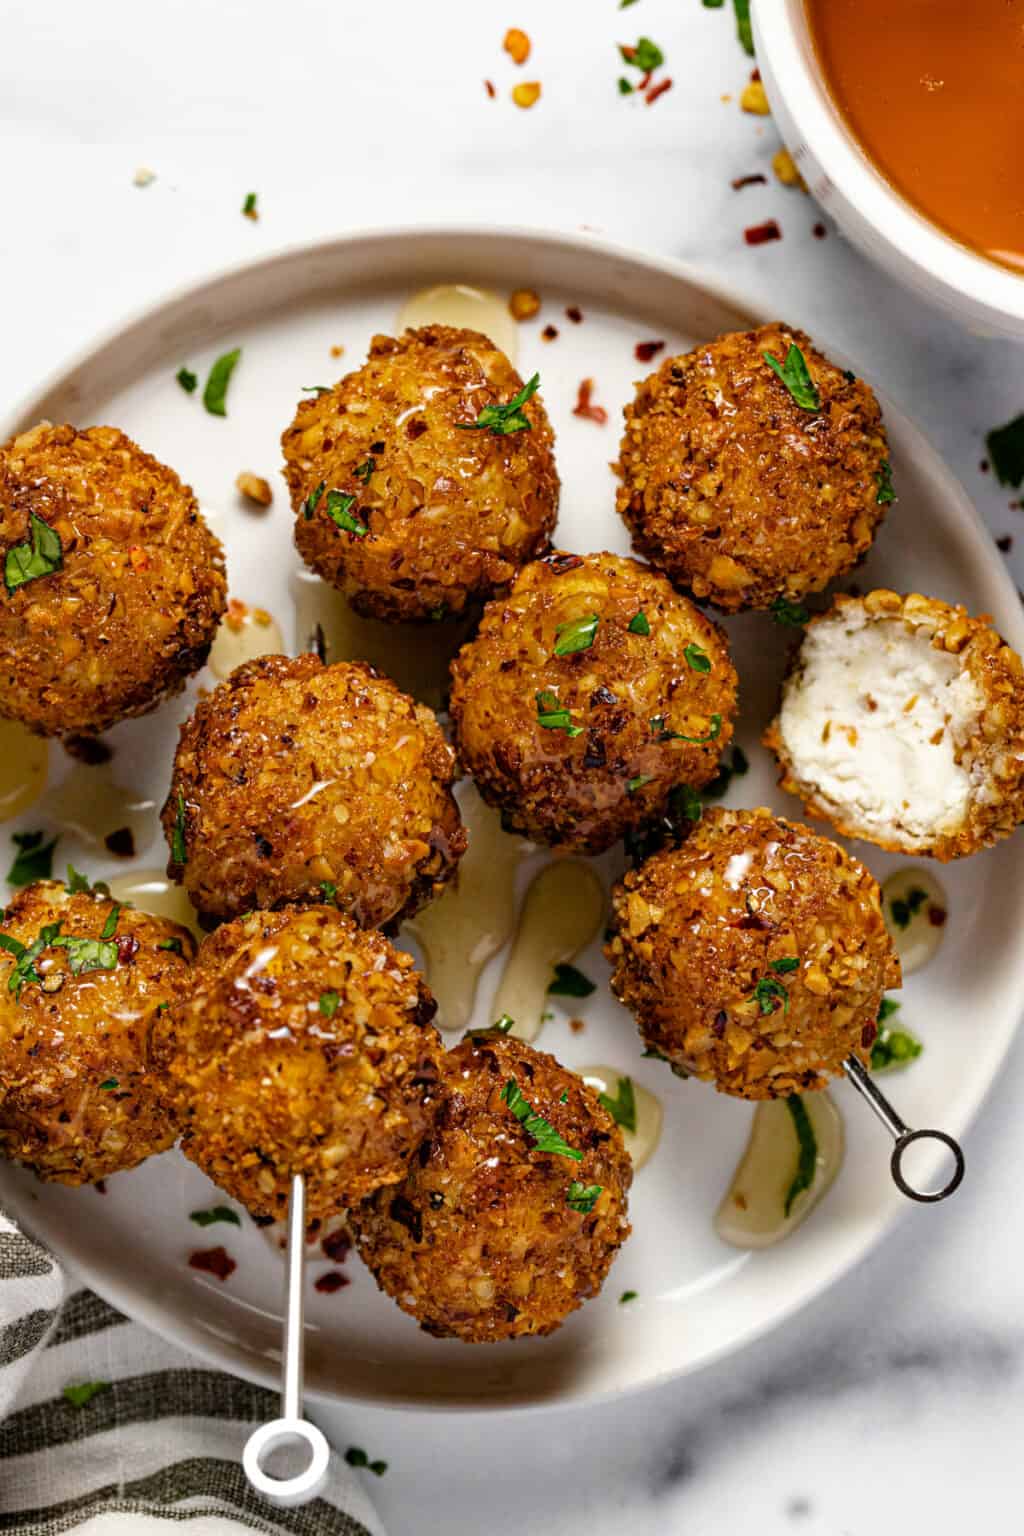 Fried Goat Cheese Balls - Midwest Foodie